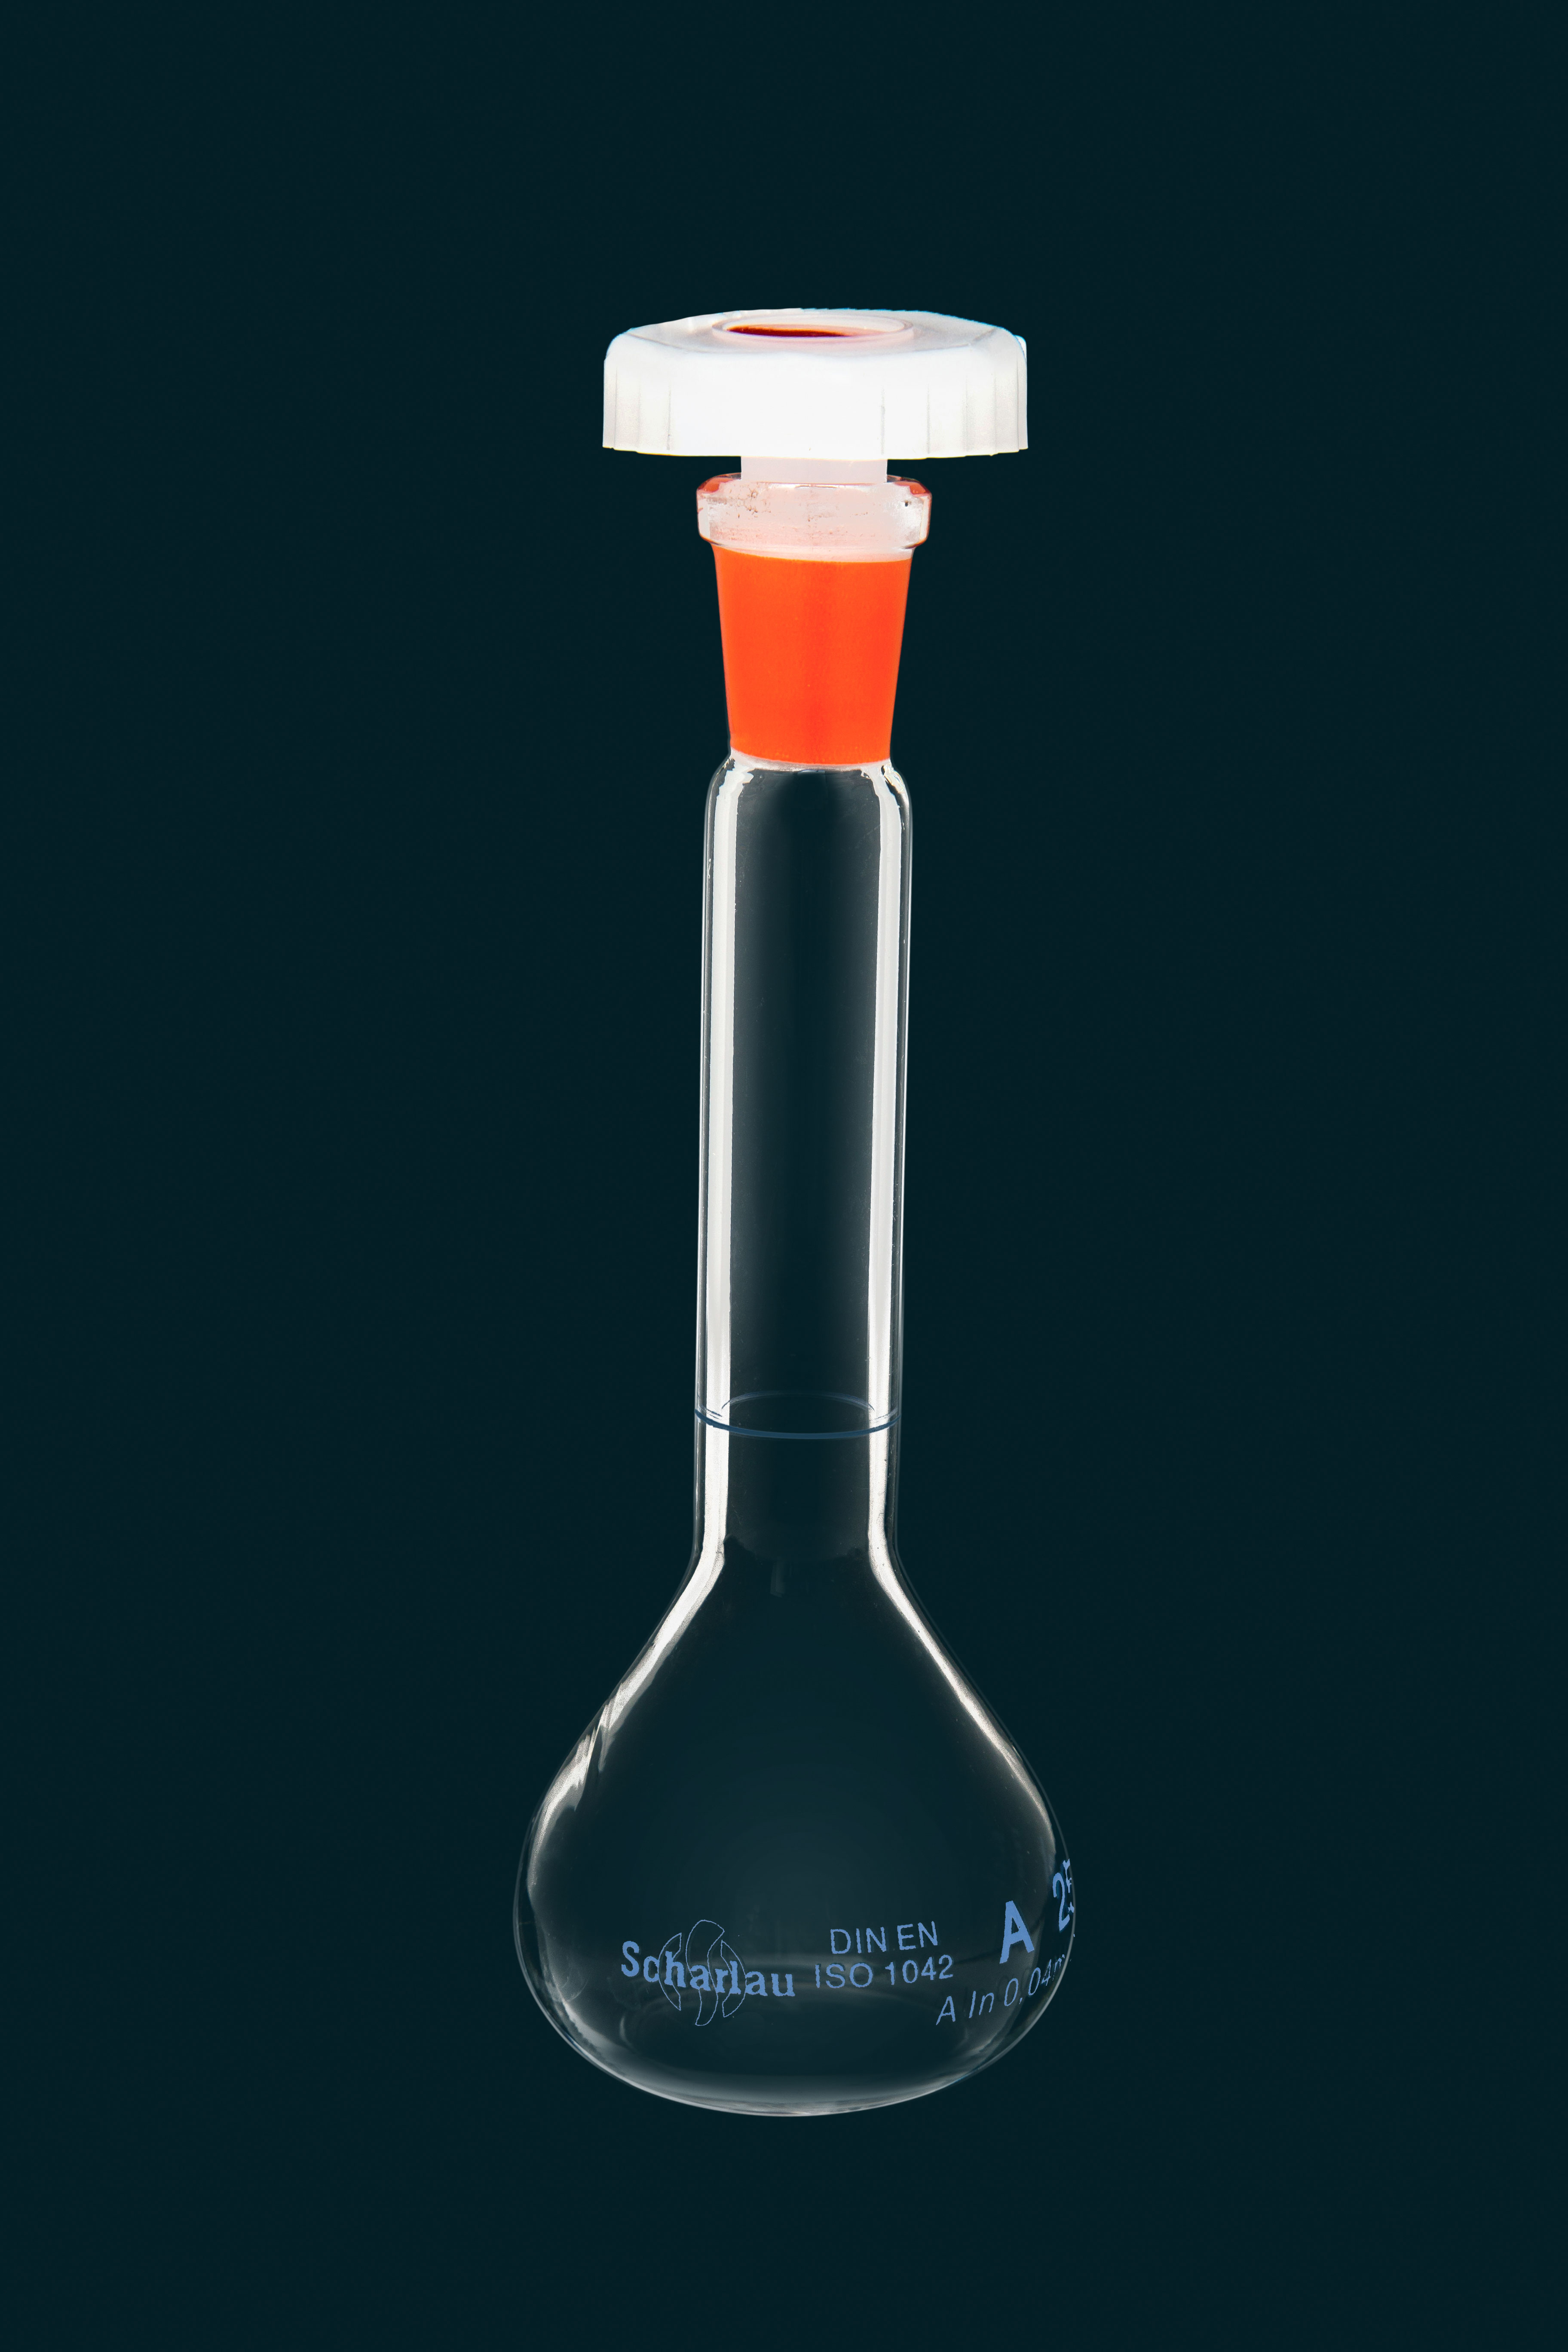 Volumetric flask with red neck, Class A, 25 ml, with PE stopper, lot number and certificate of conformity